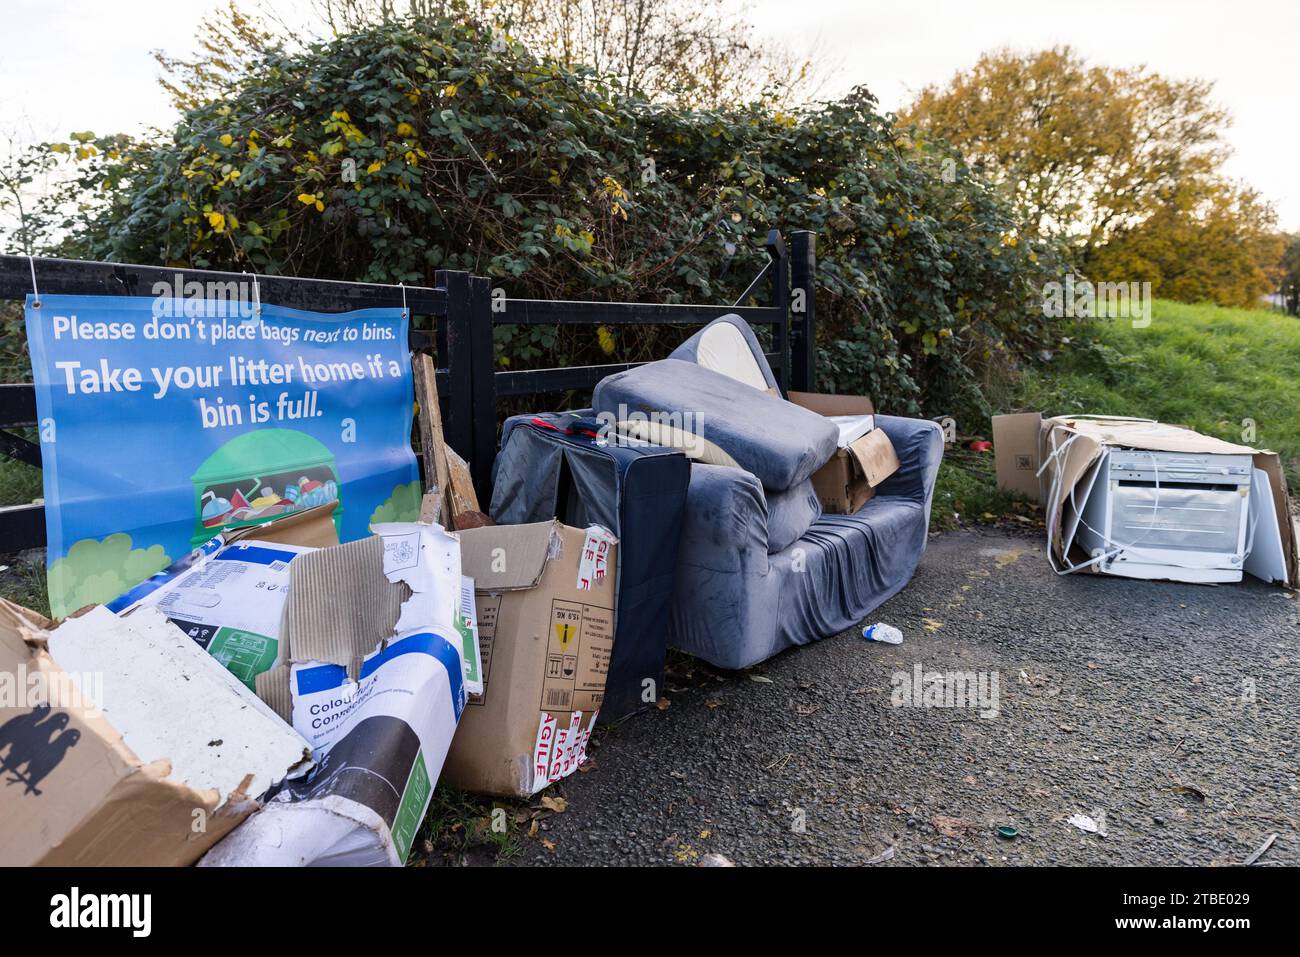 A fly tipping site including cardboard boxes, a couch, suitcase and fridge freezer by a 'Take Your Litter Home' banner. Photo by Amanda Rose/Alamy Stock Photo